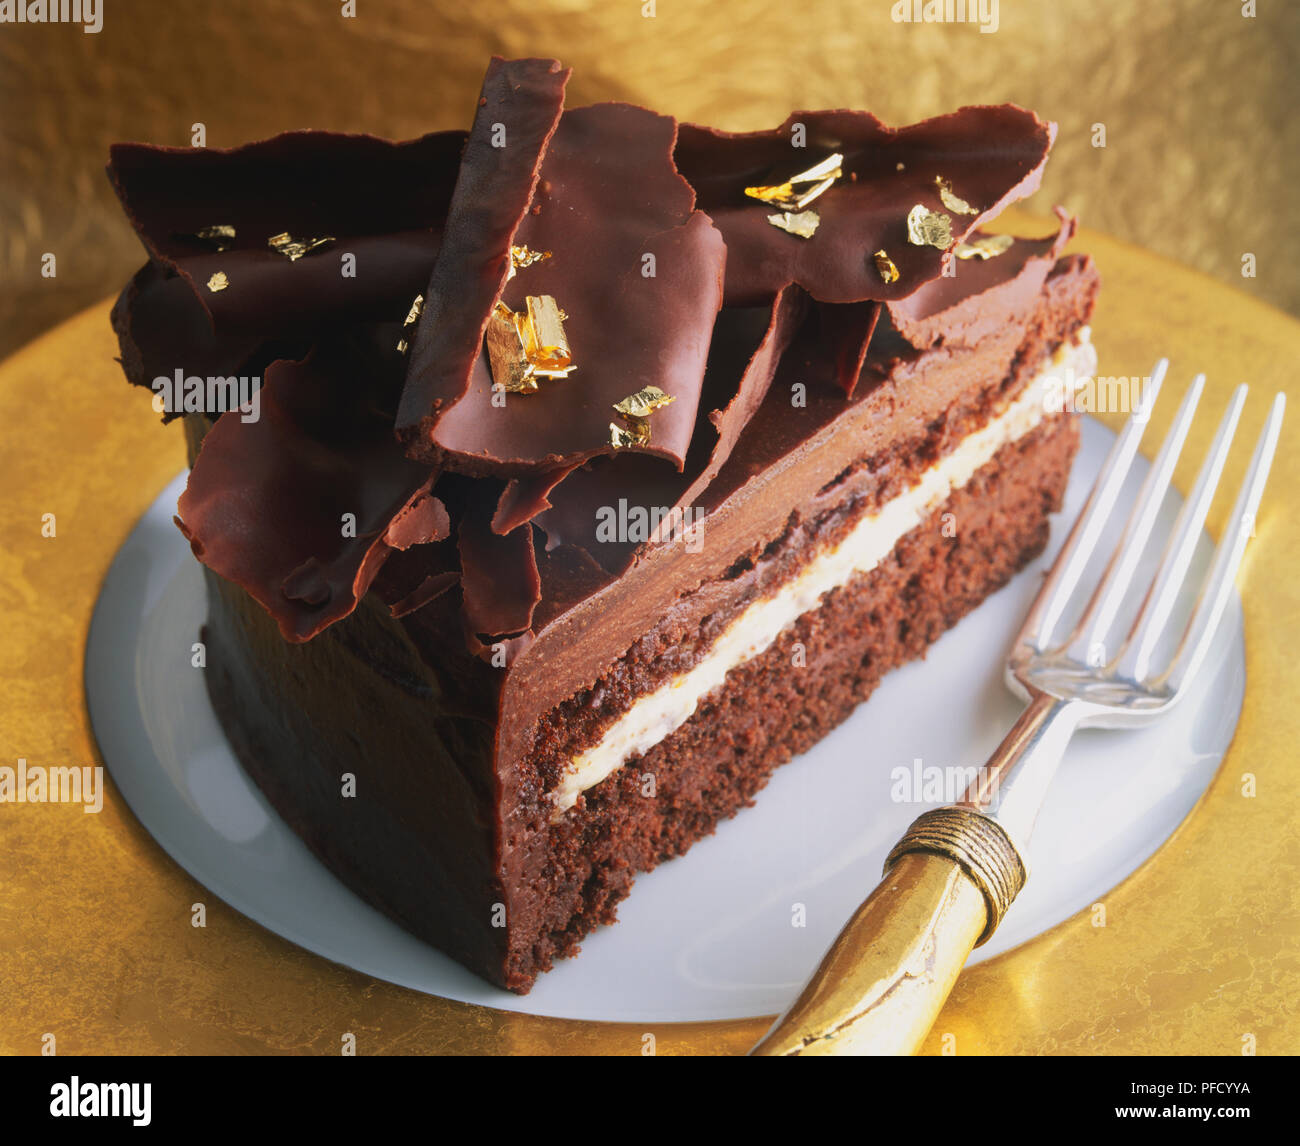 Slice of filled and iced chocolate cake decorated with chocolate ...